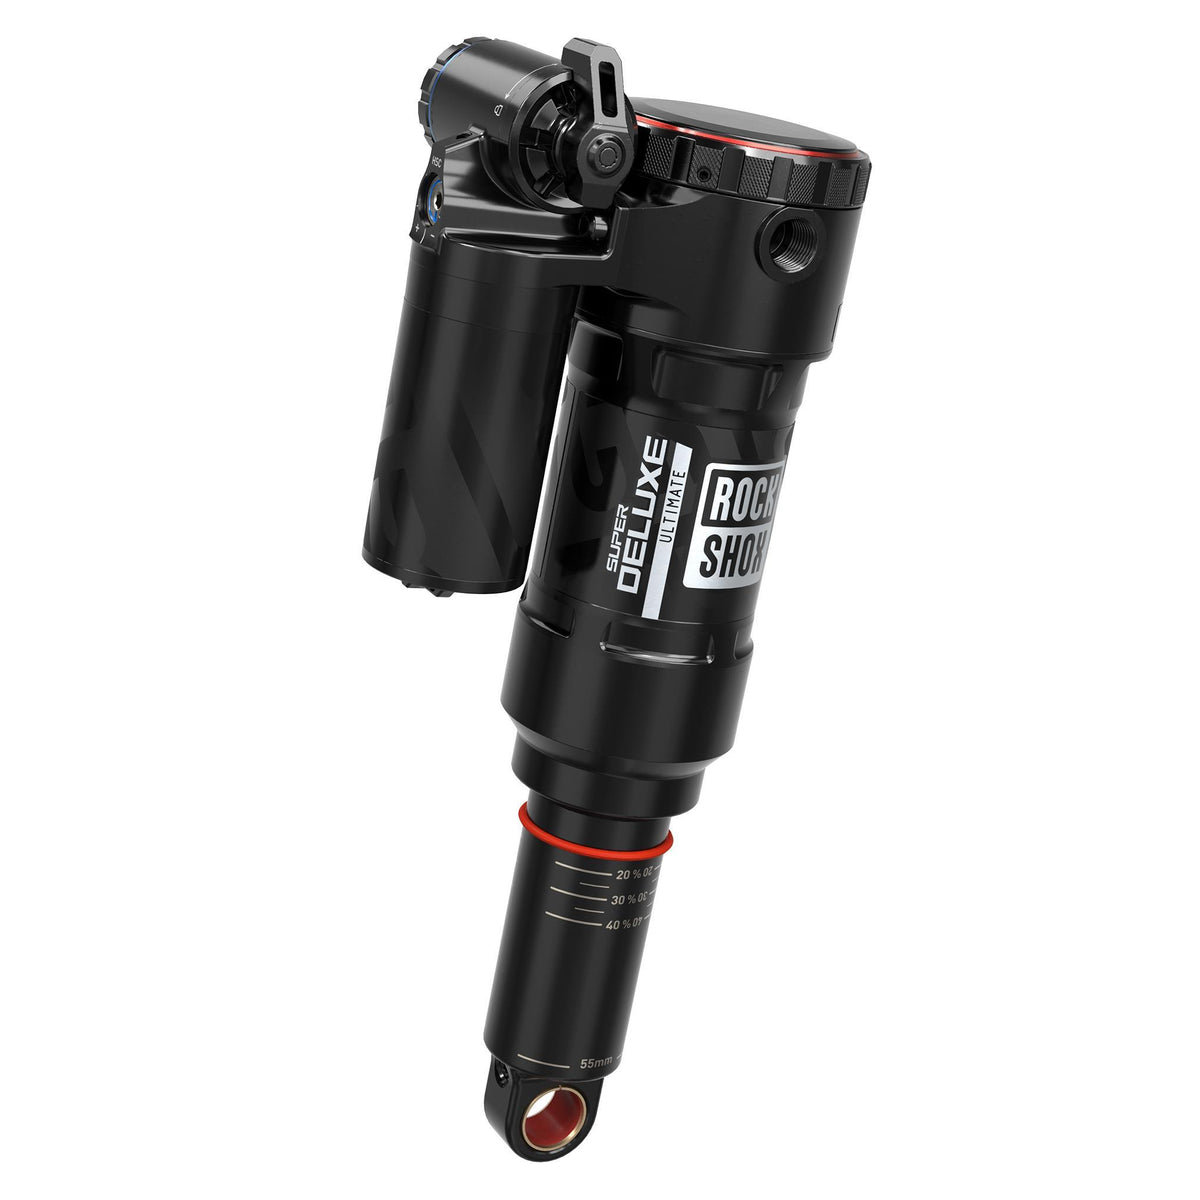 Rockshox Super Deluxe Ultimate RC2T Rear Shock - Progressive Air, 0Neg/2Pos Tokens, Linearreb/Lcomp, 320LB Lockout, Hydraulic Bottom Out, Trunnion Standard(8X37.6)C1 Gt Force 2020 Black 185X55